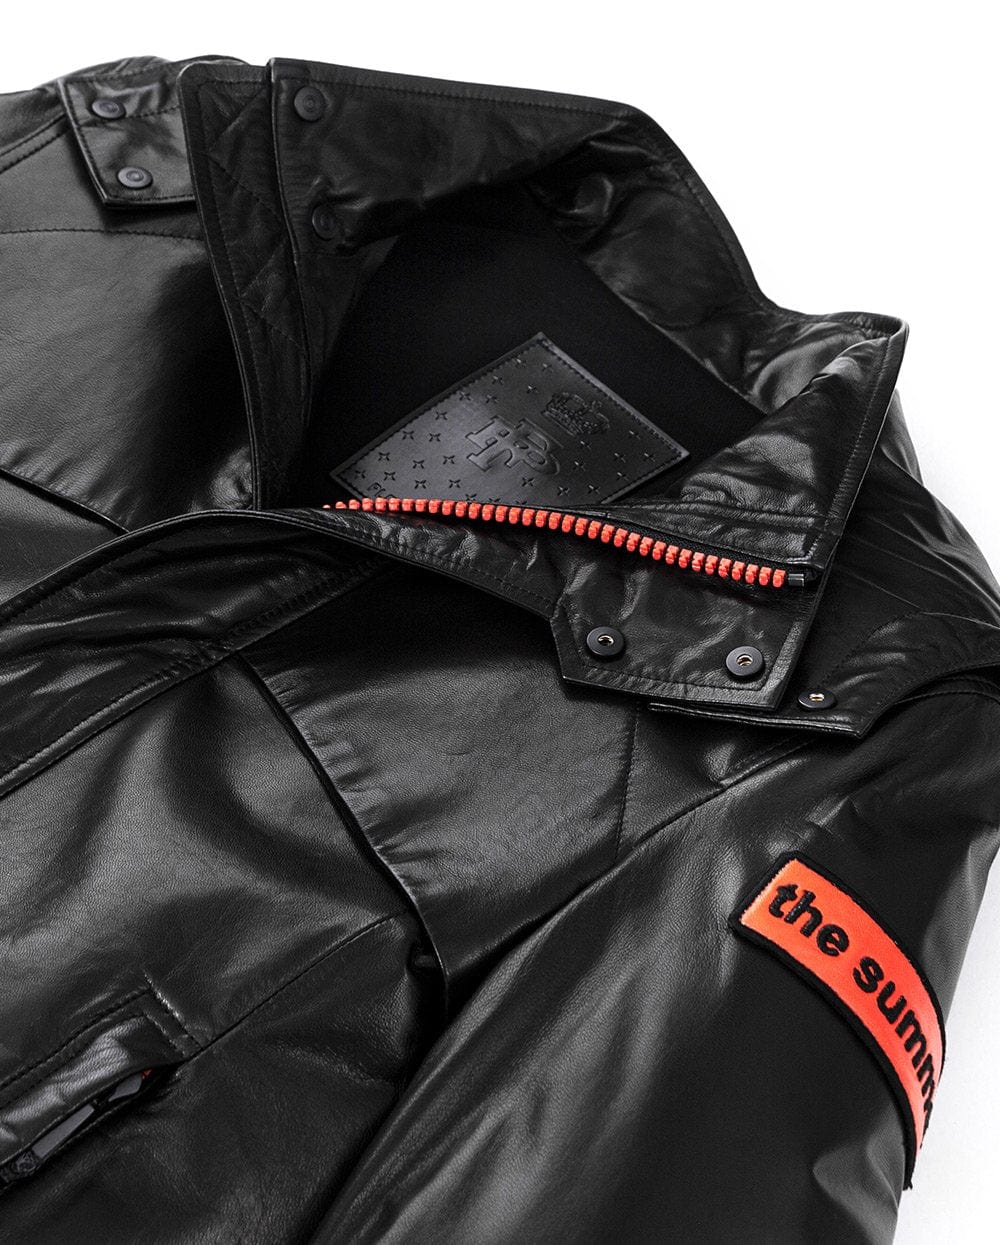 Hooded Patches Genuine Leather Bomber Jacket